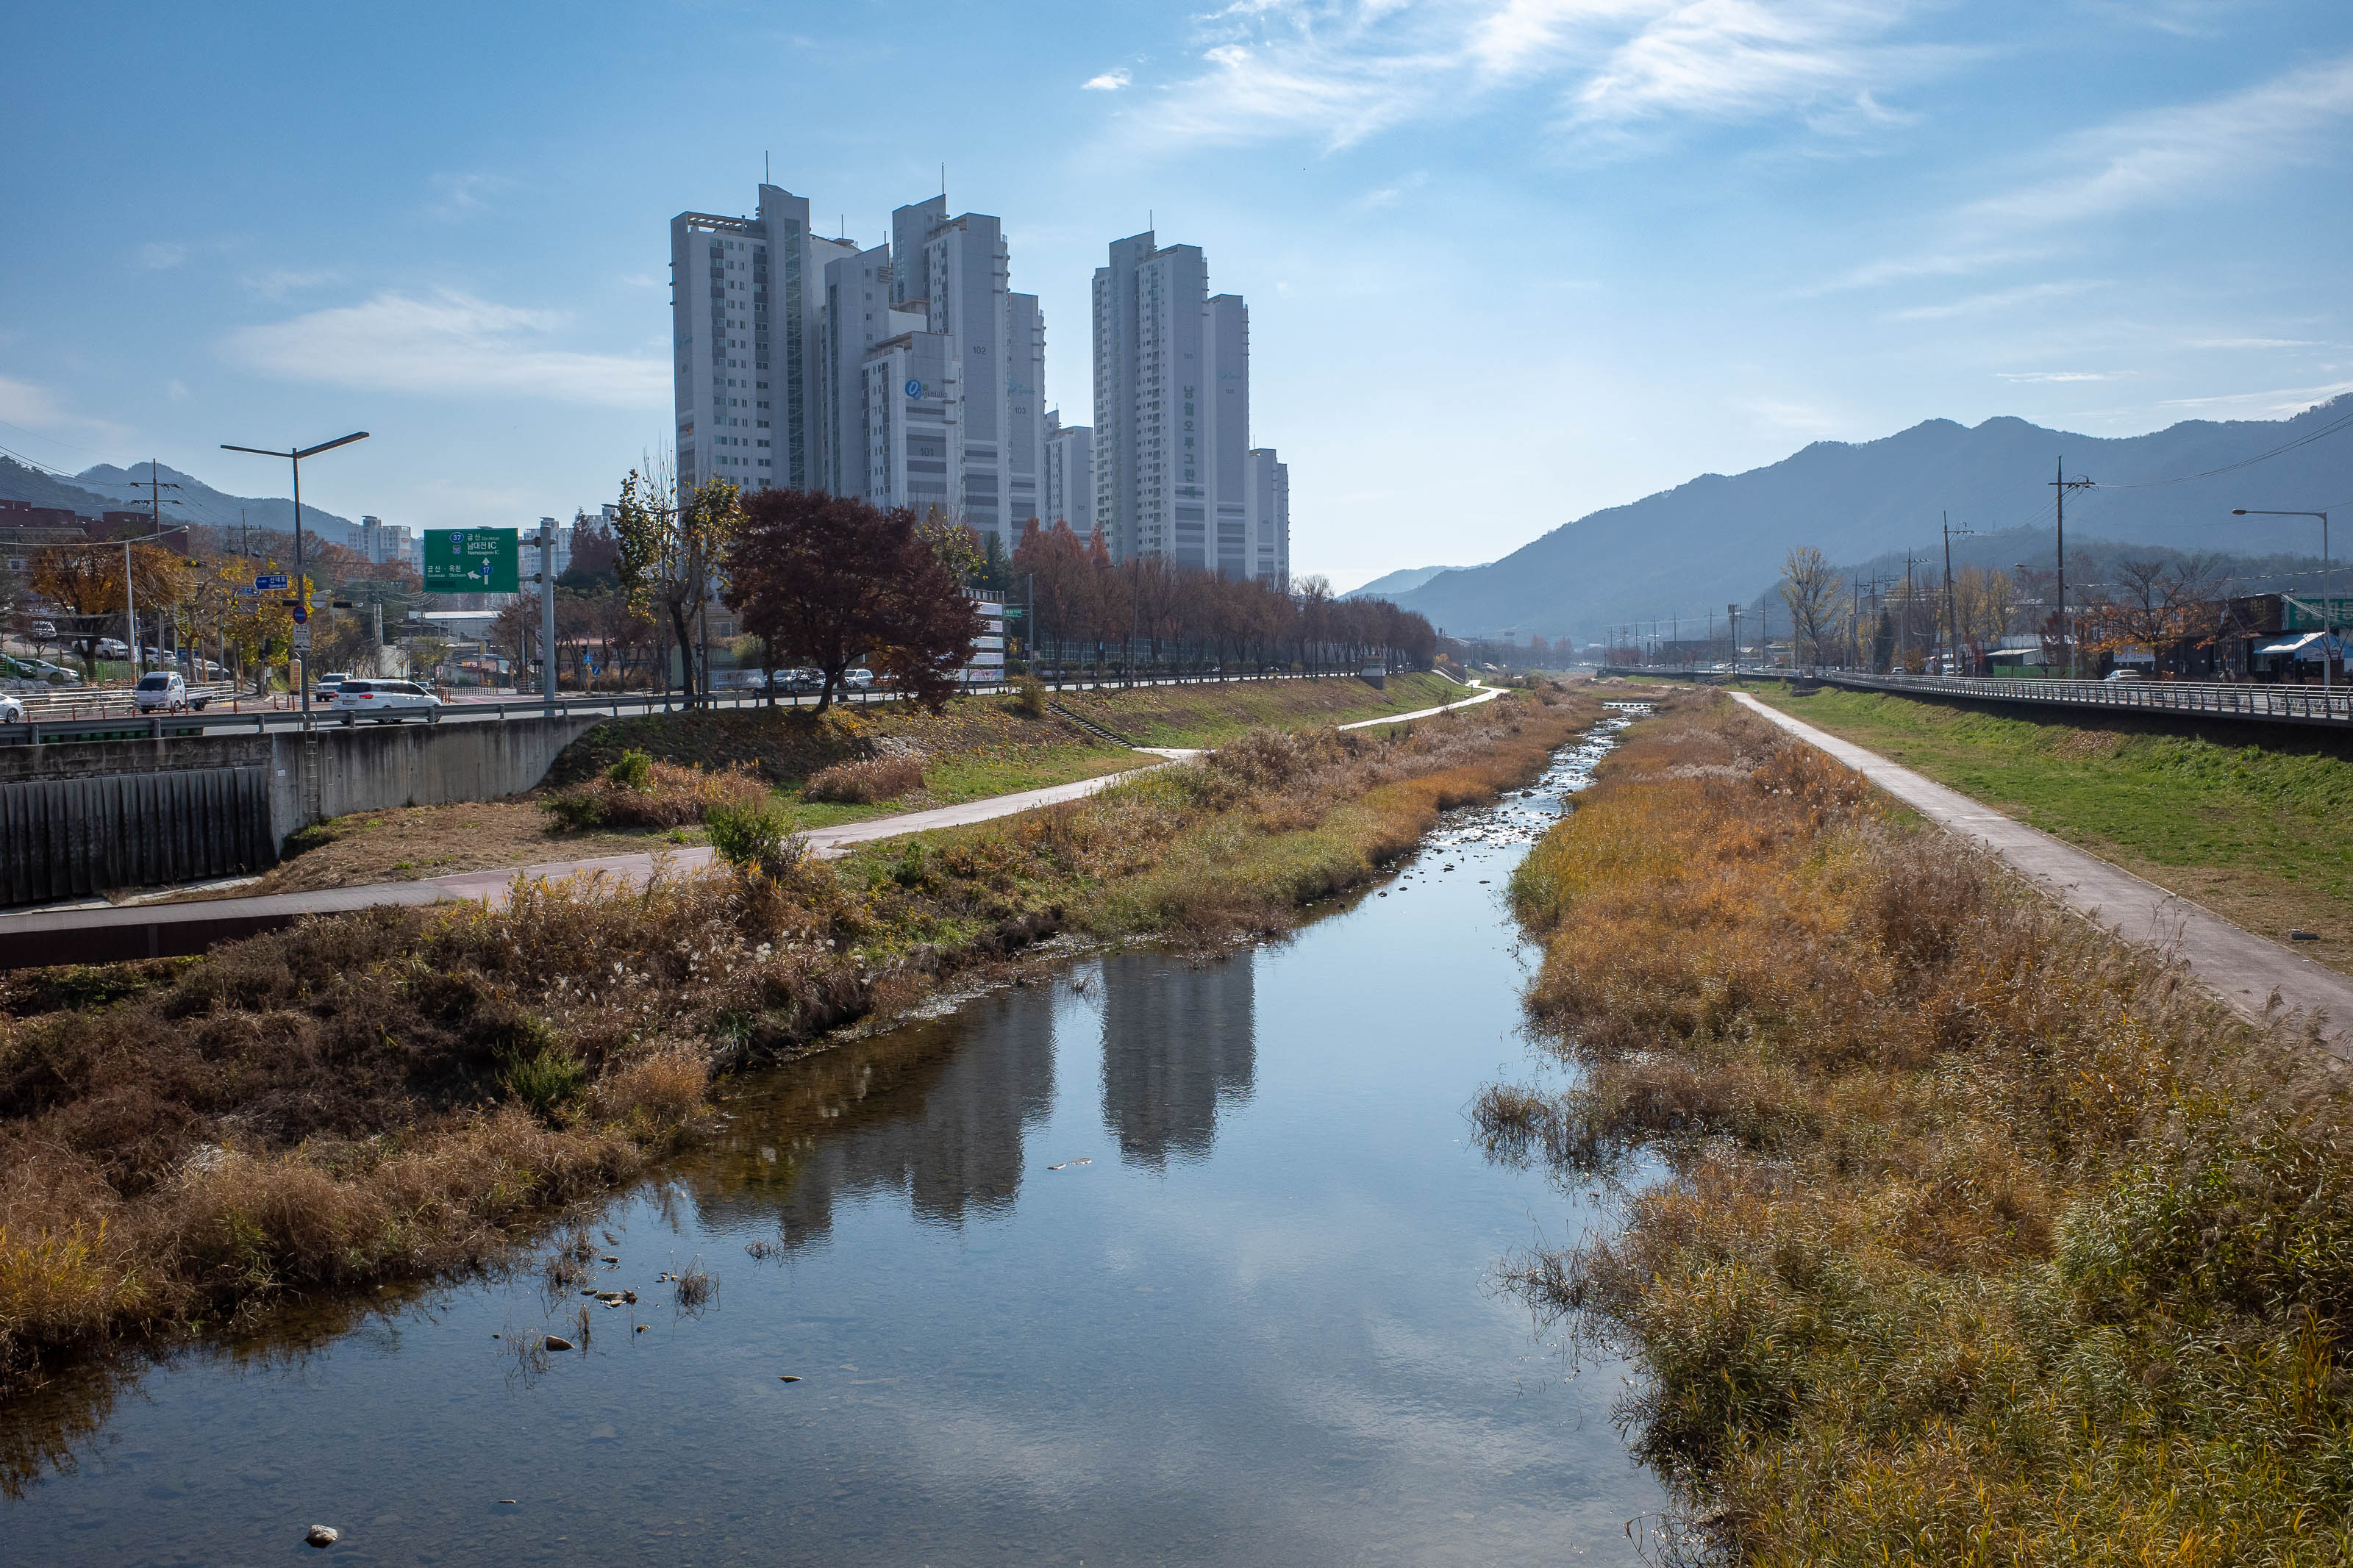 Korean-Hiking-Daejeon-Bomunsan - However, I did get to cross over a nice stream, always a highlight.